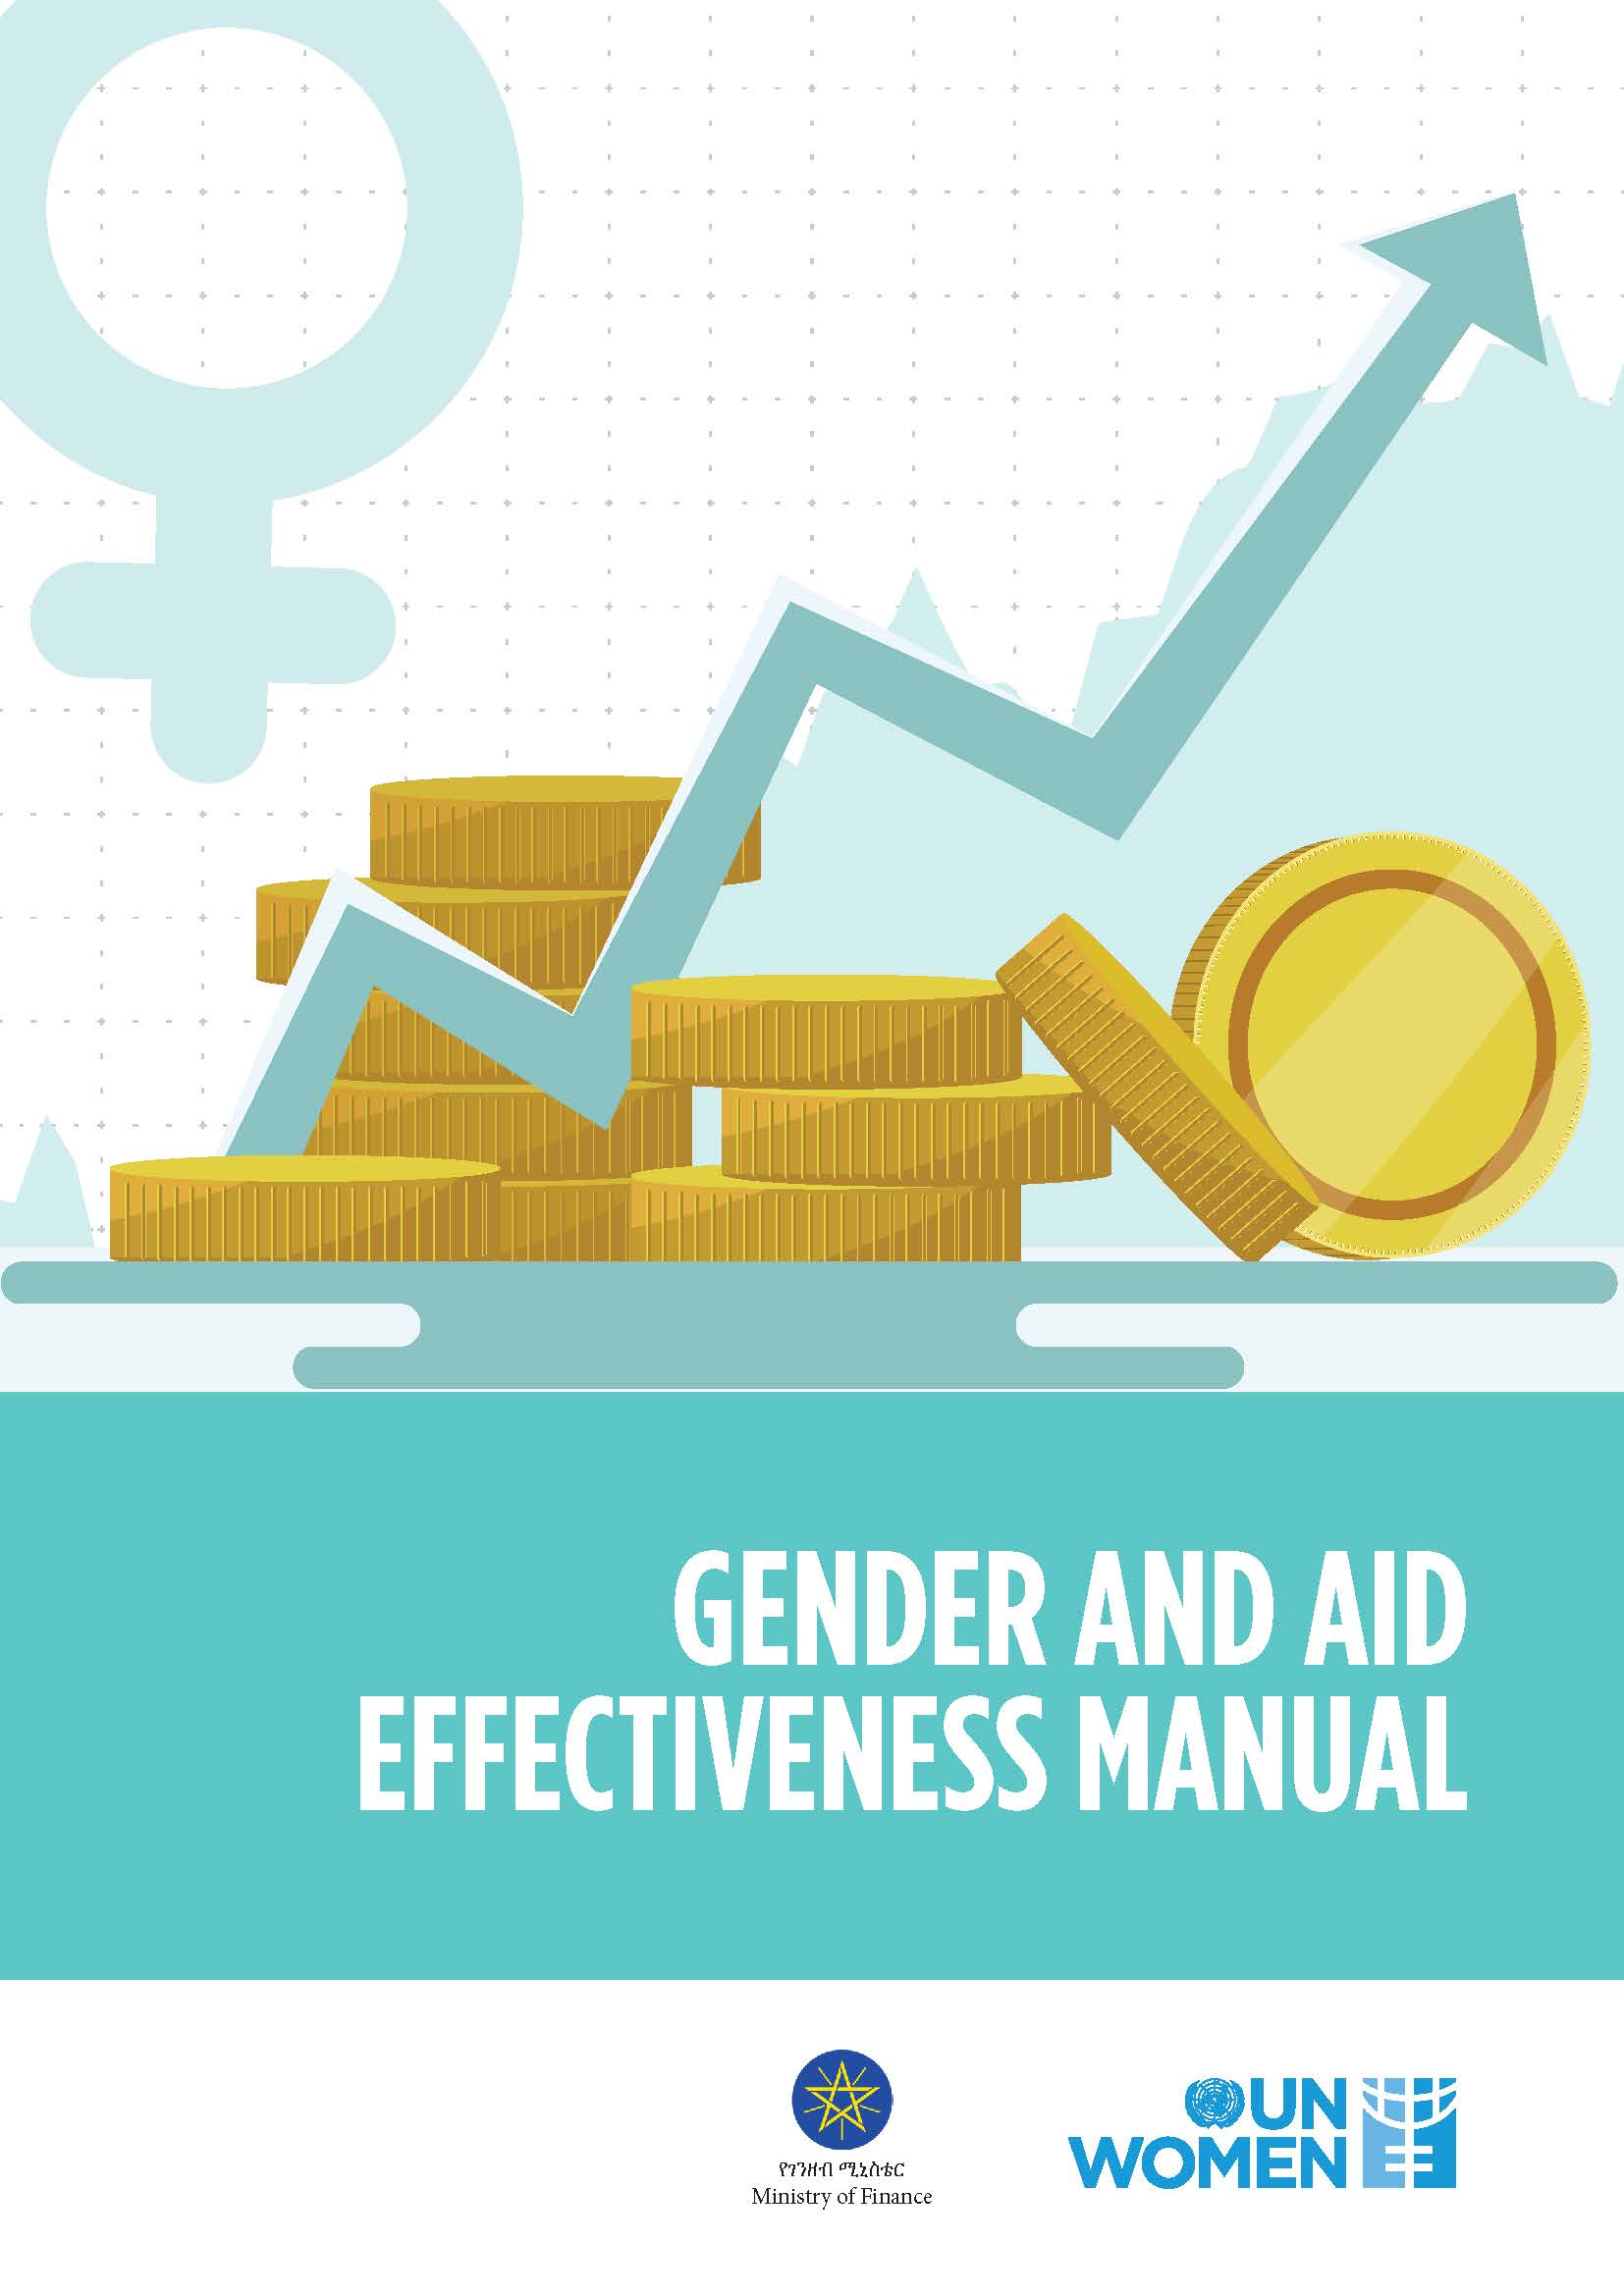 Gender and Aid Effectiveness Manual